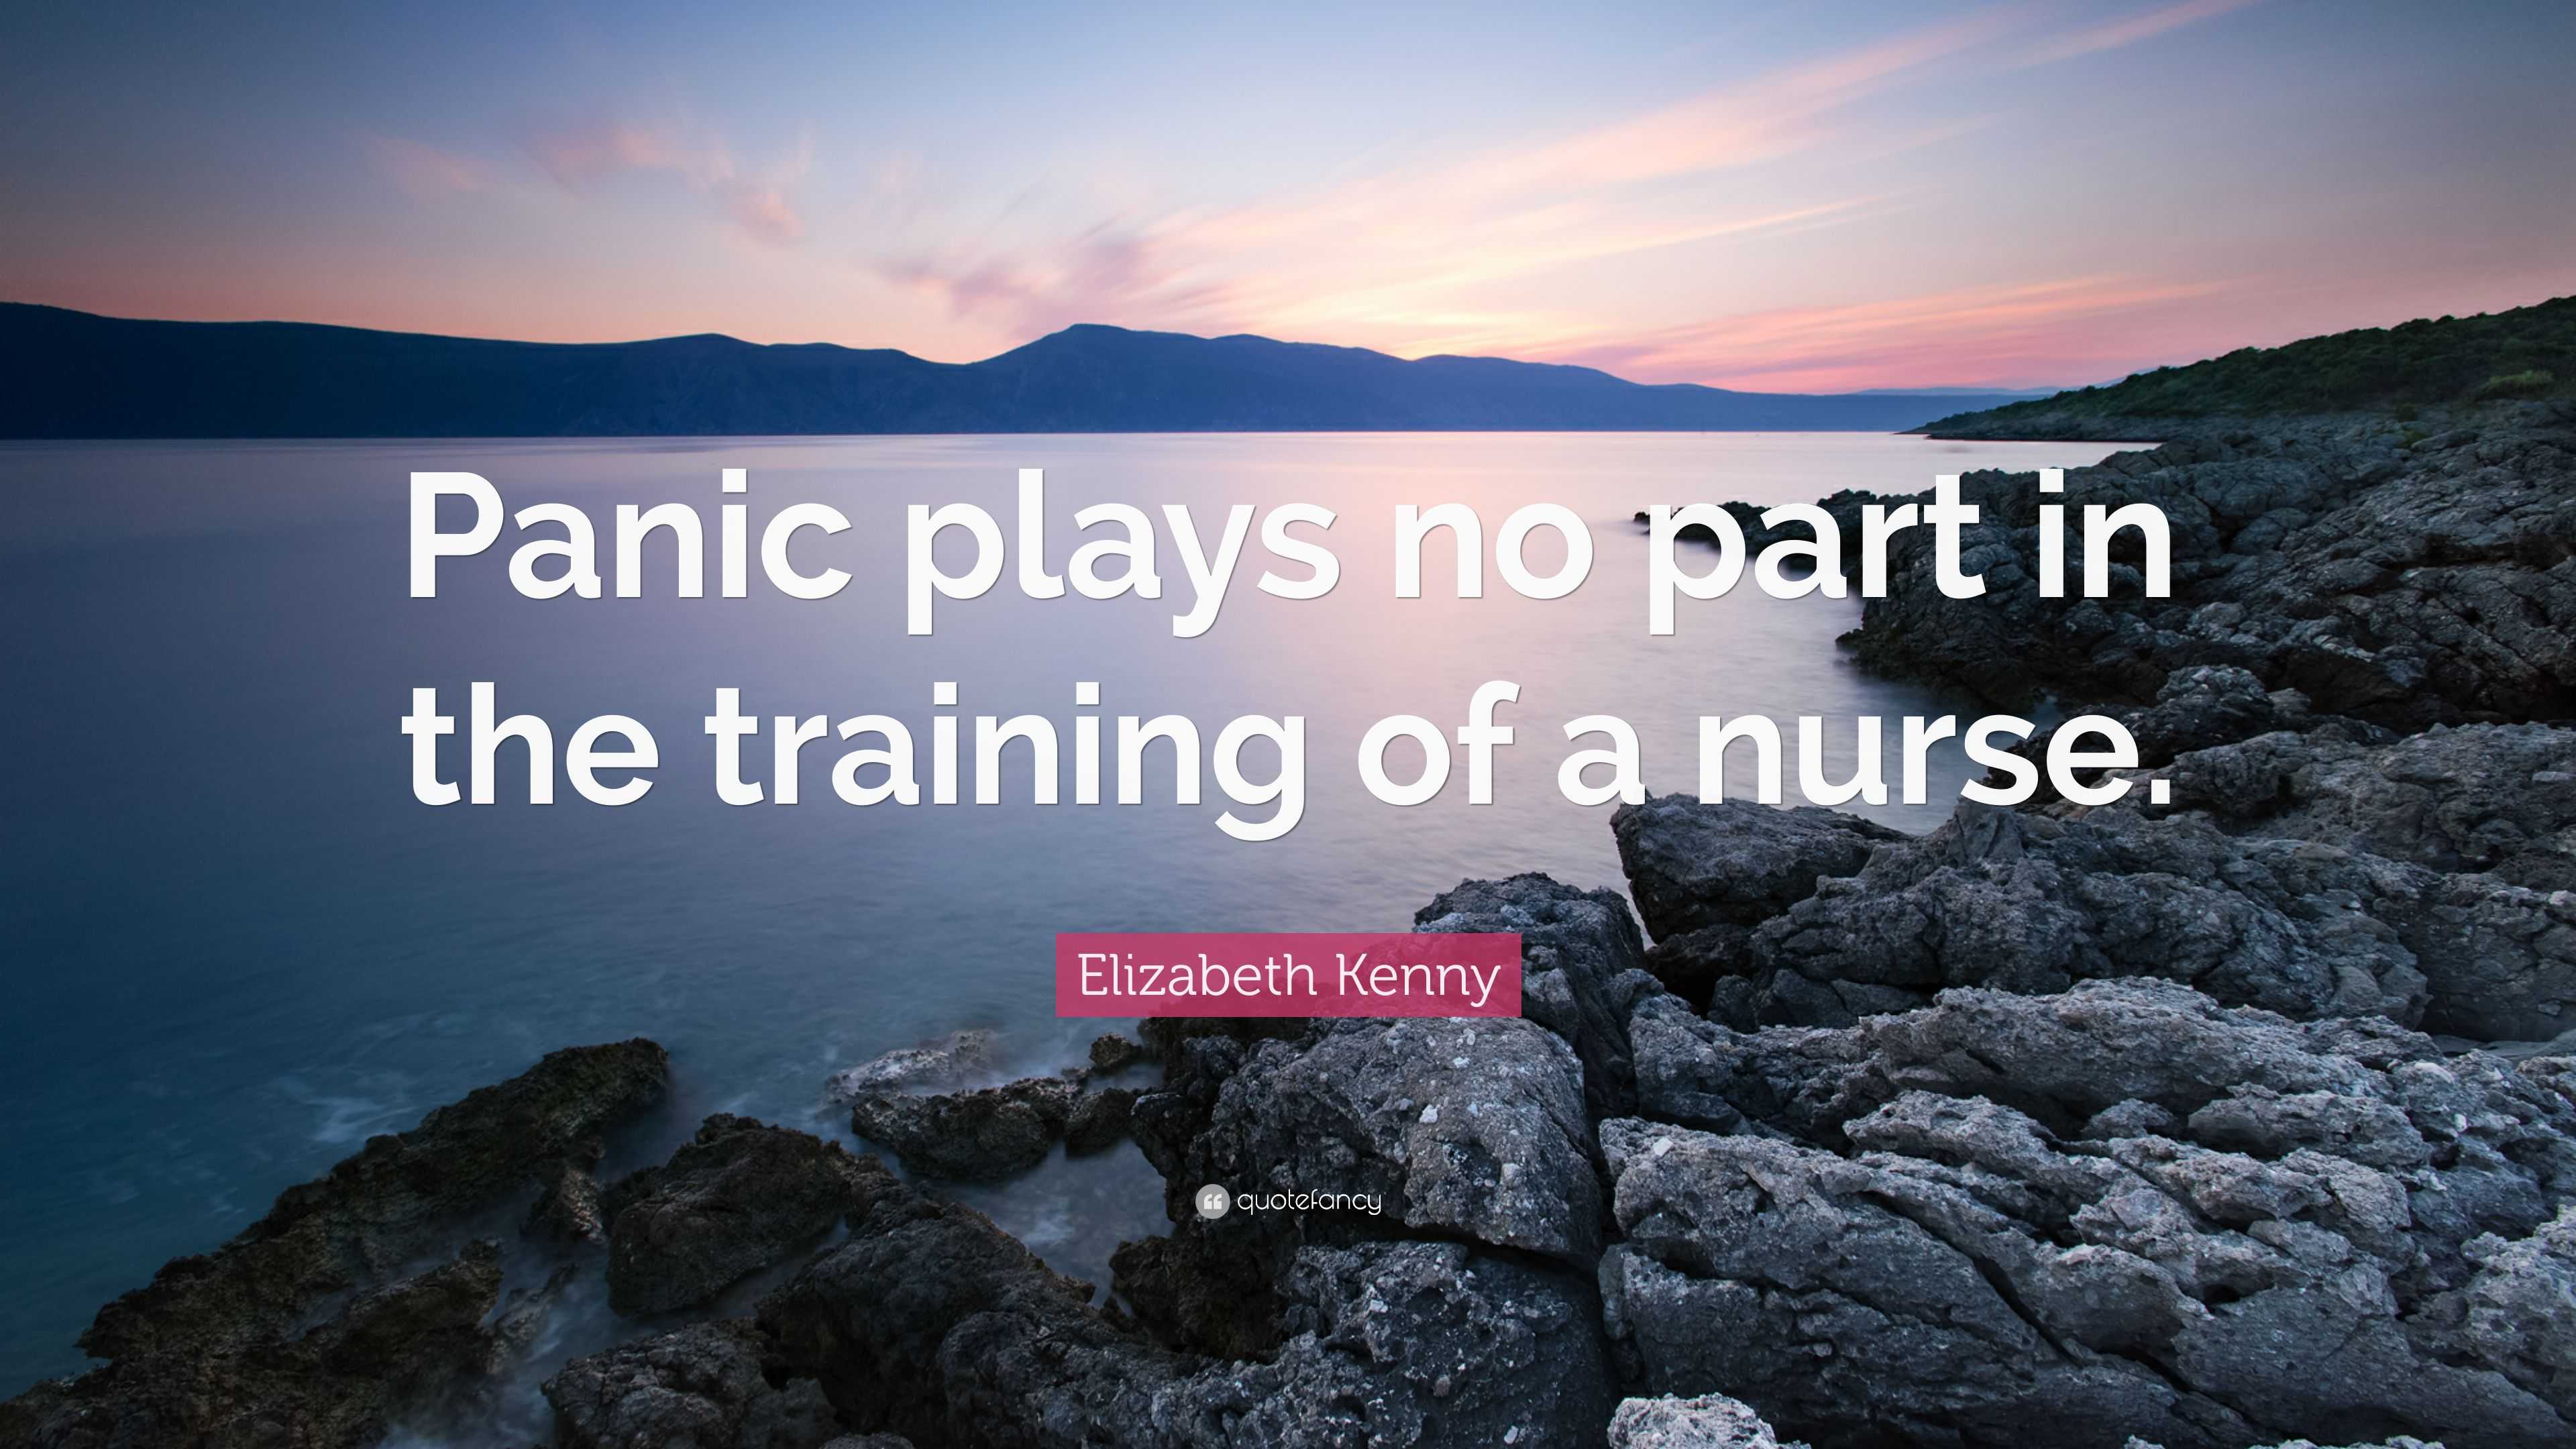 Elizabeth Kenny Quote: “Panic plays no part in the training of a nurse.”